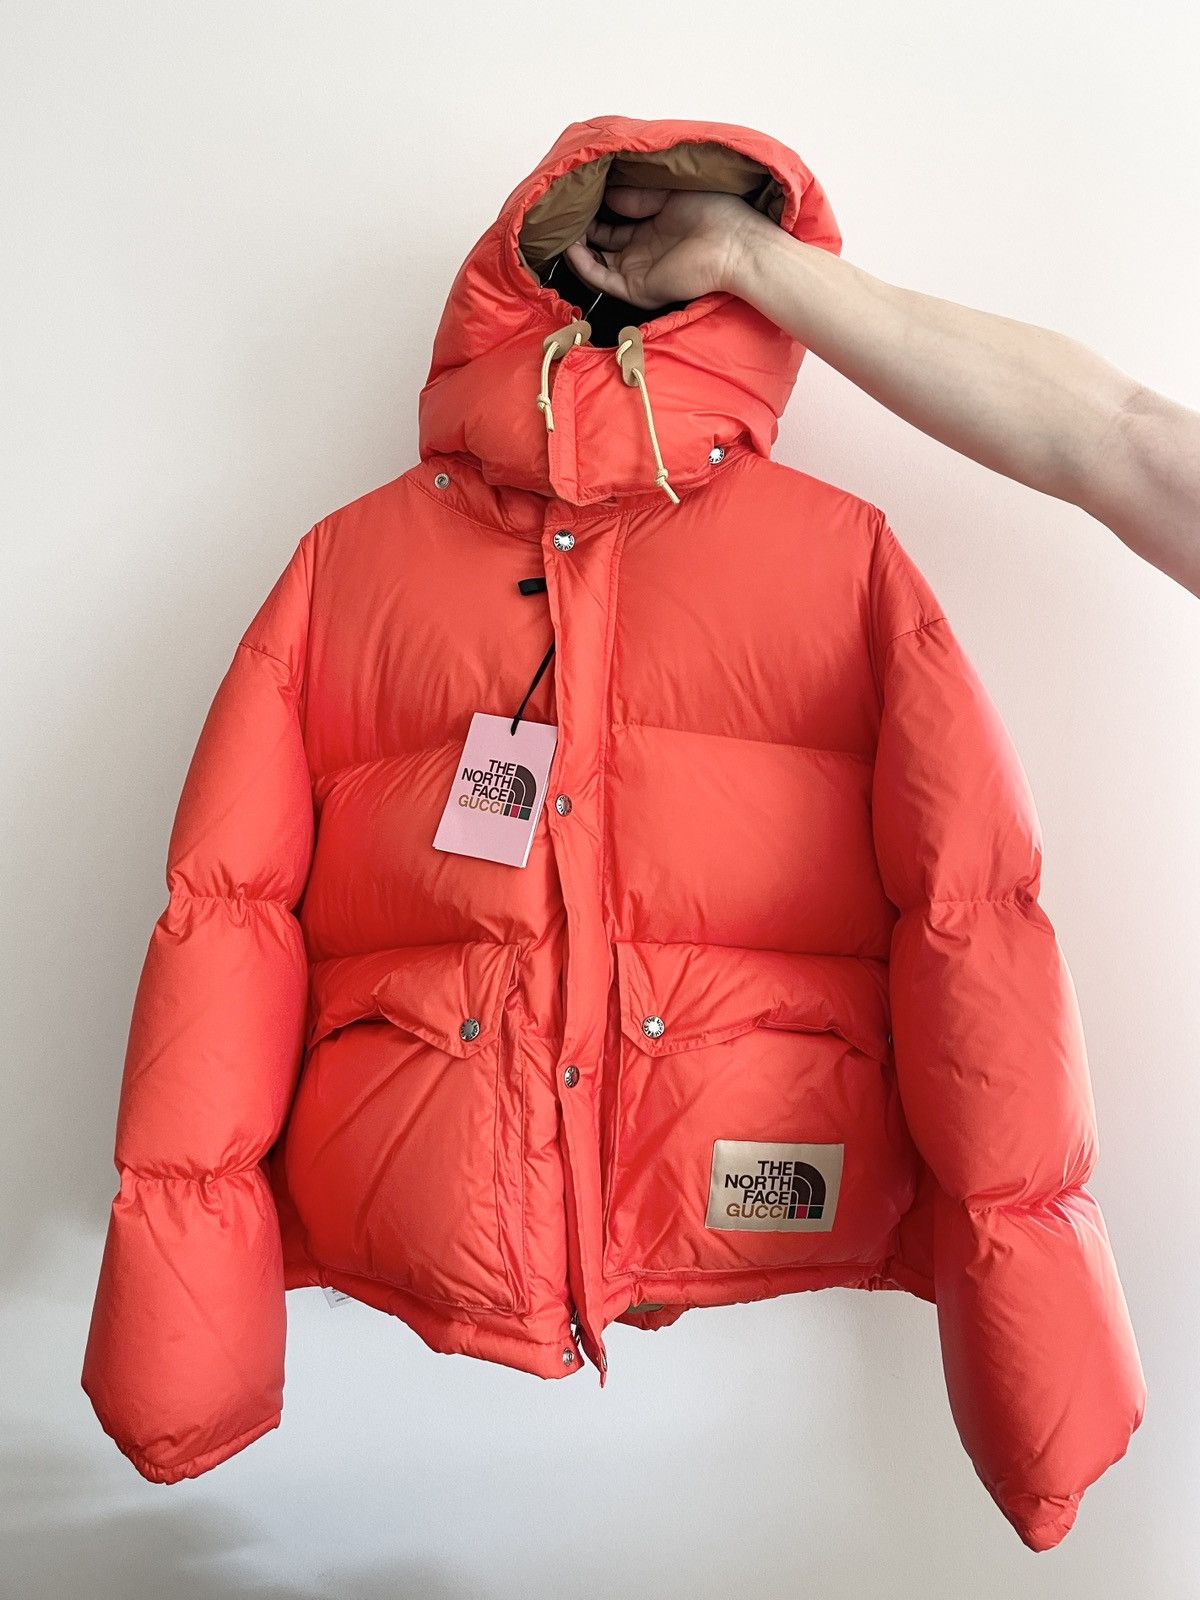 GRAIL! 2021 Gucci x The North Face Puffer Jacket in Large - 1